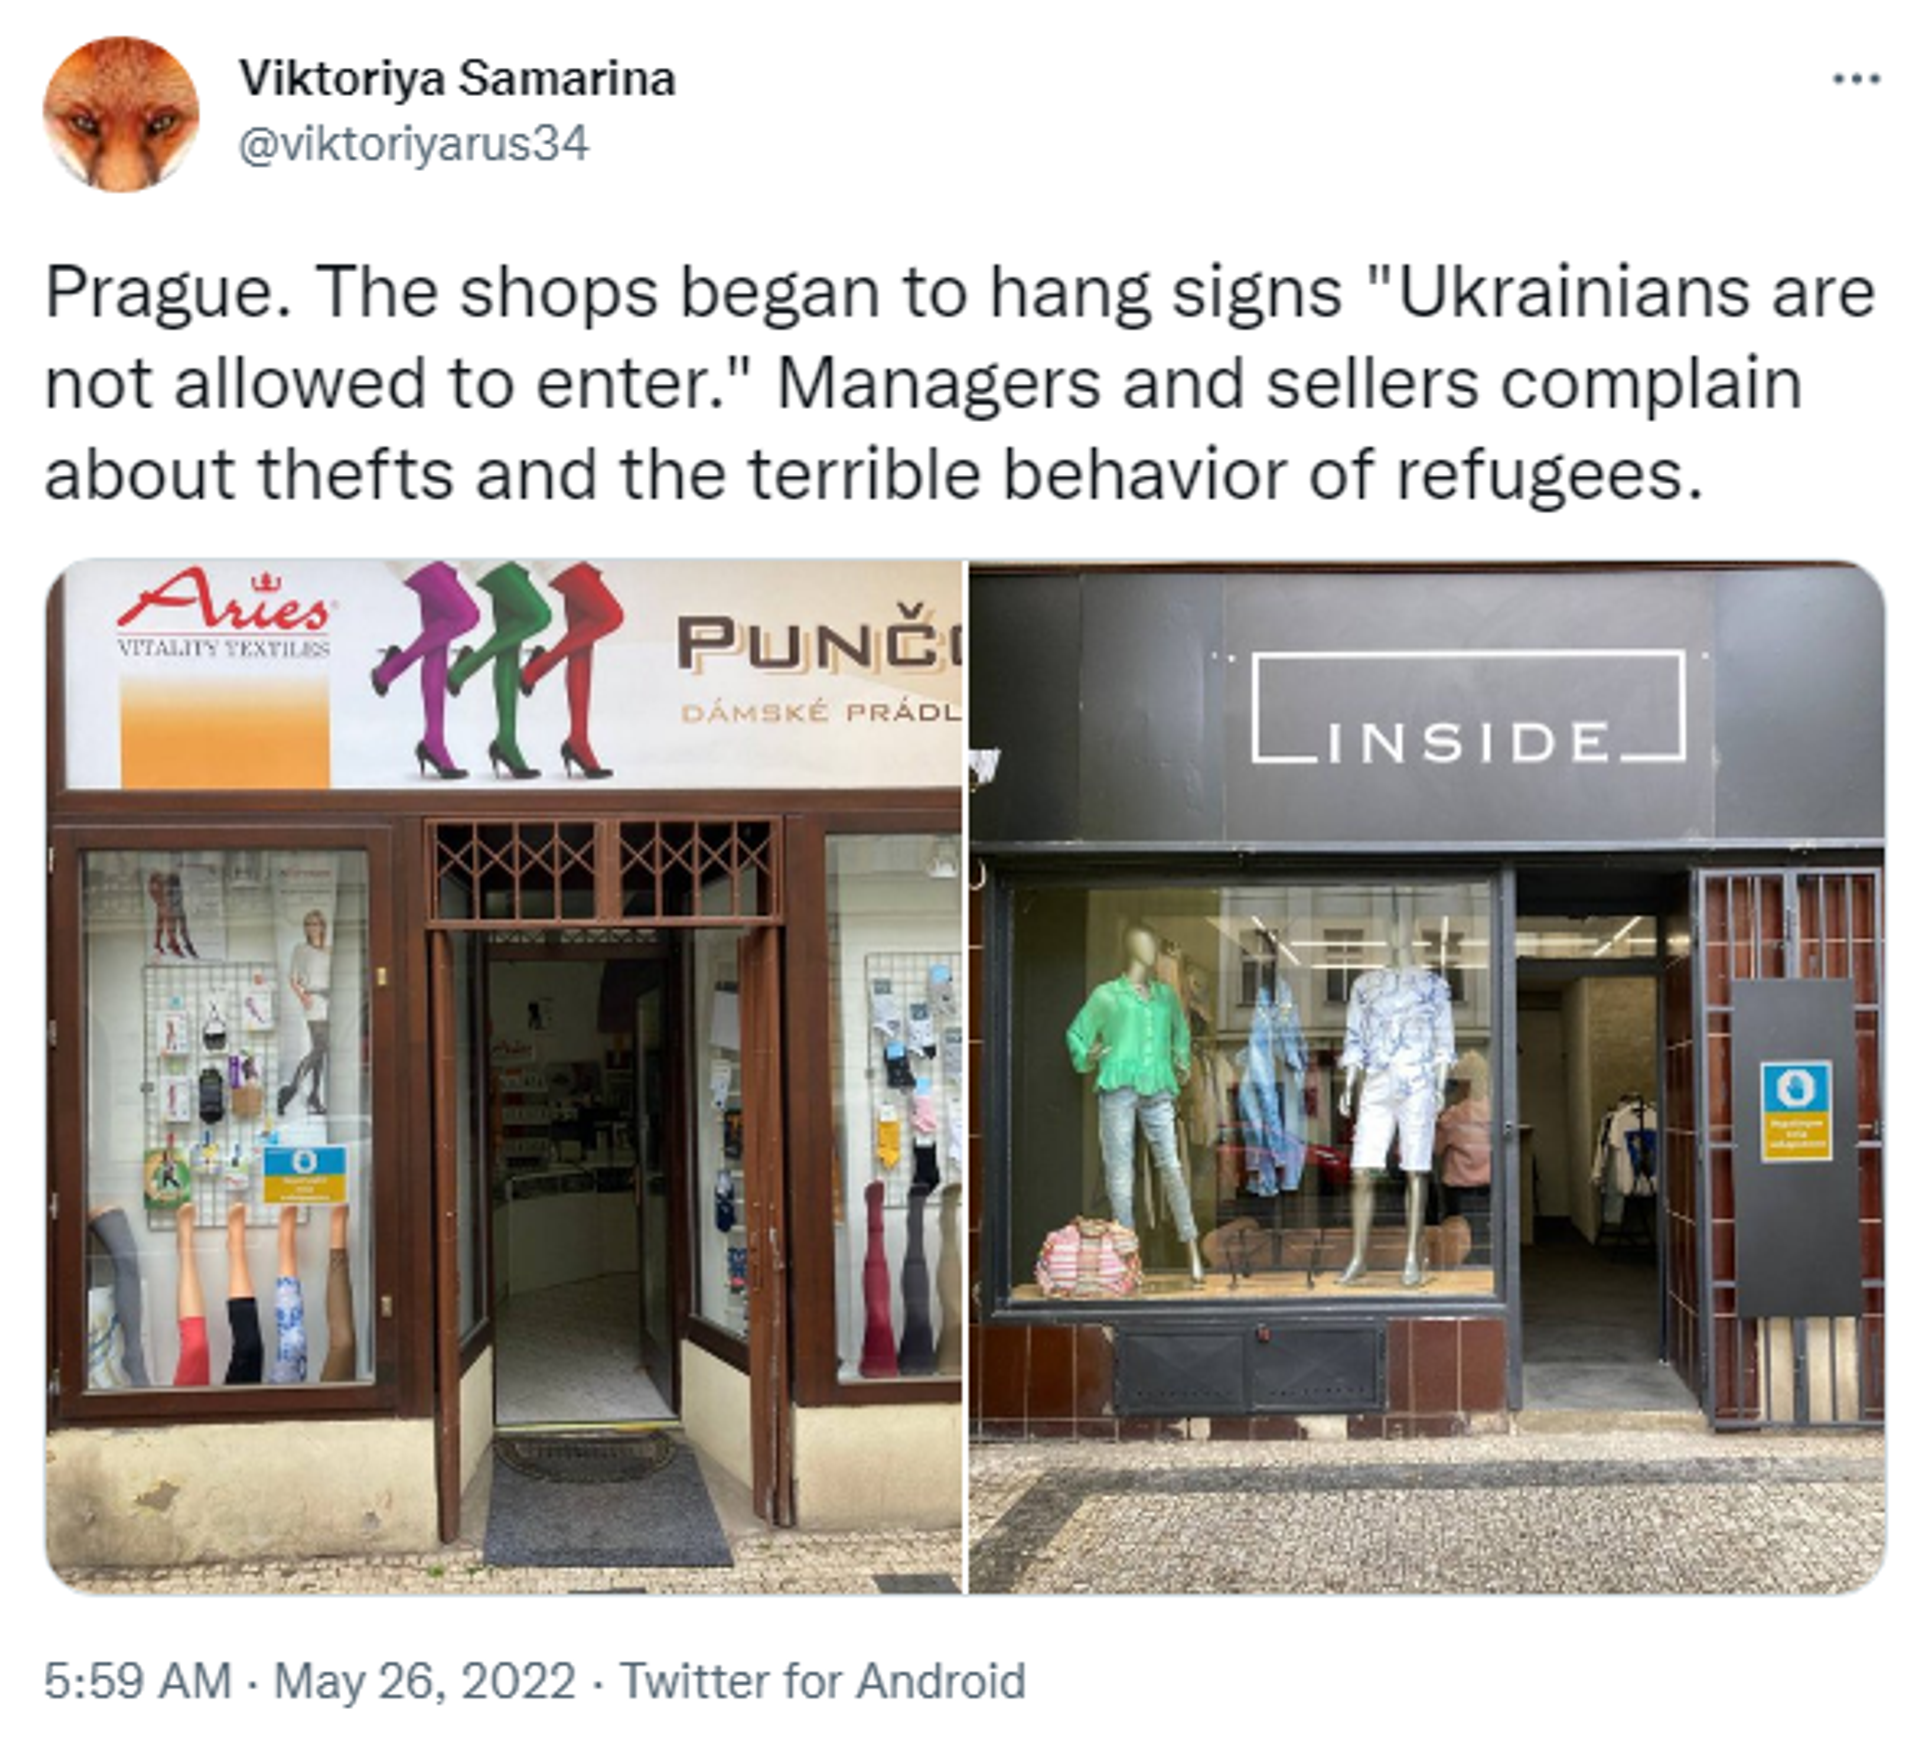 Tweeted images of No entry to Ukrainians signs outside shops in the Czech capital Prague - Sputnik International, 1920, 26.05.2022